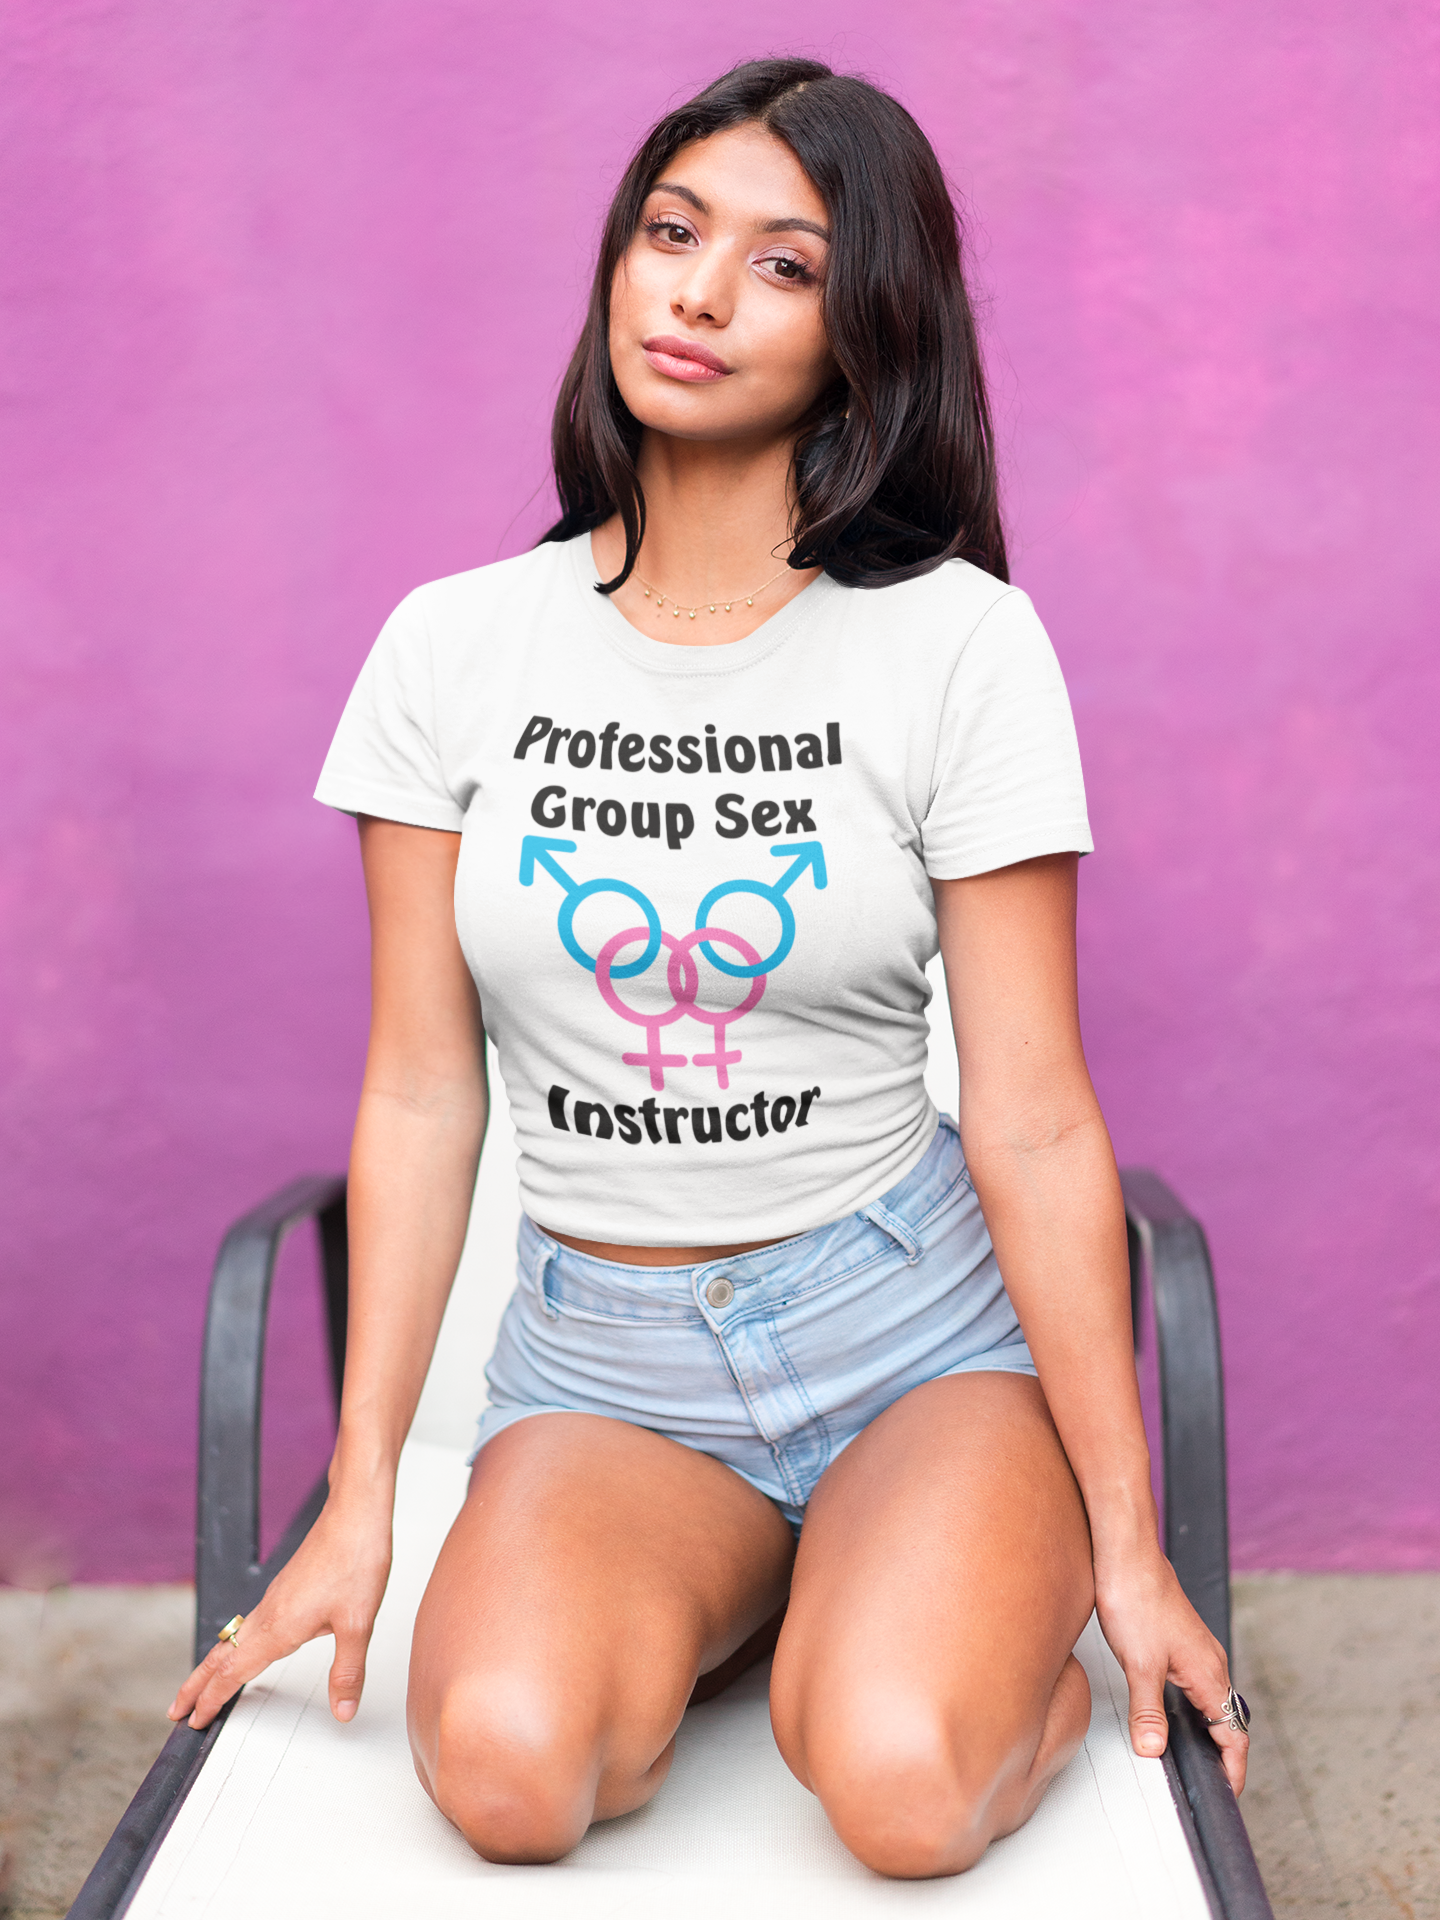 Professional Group Sex Instructor pic